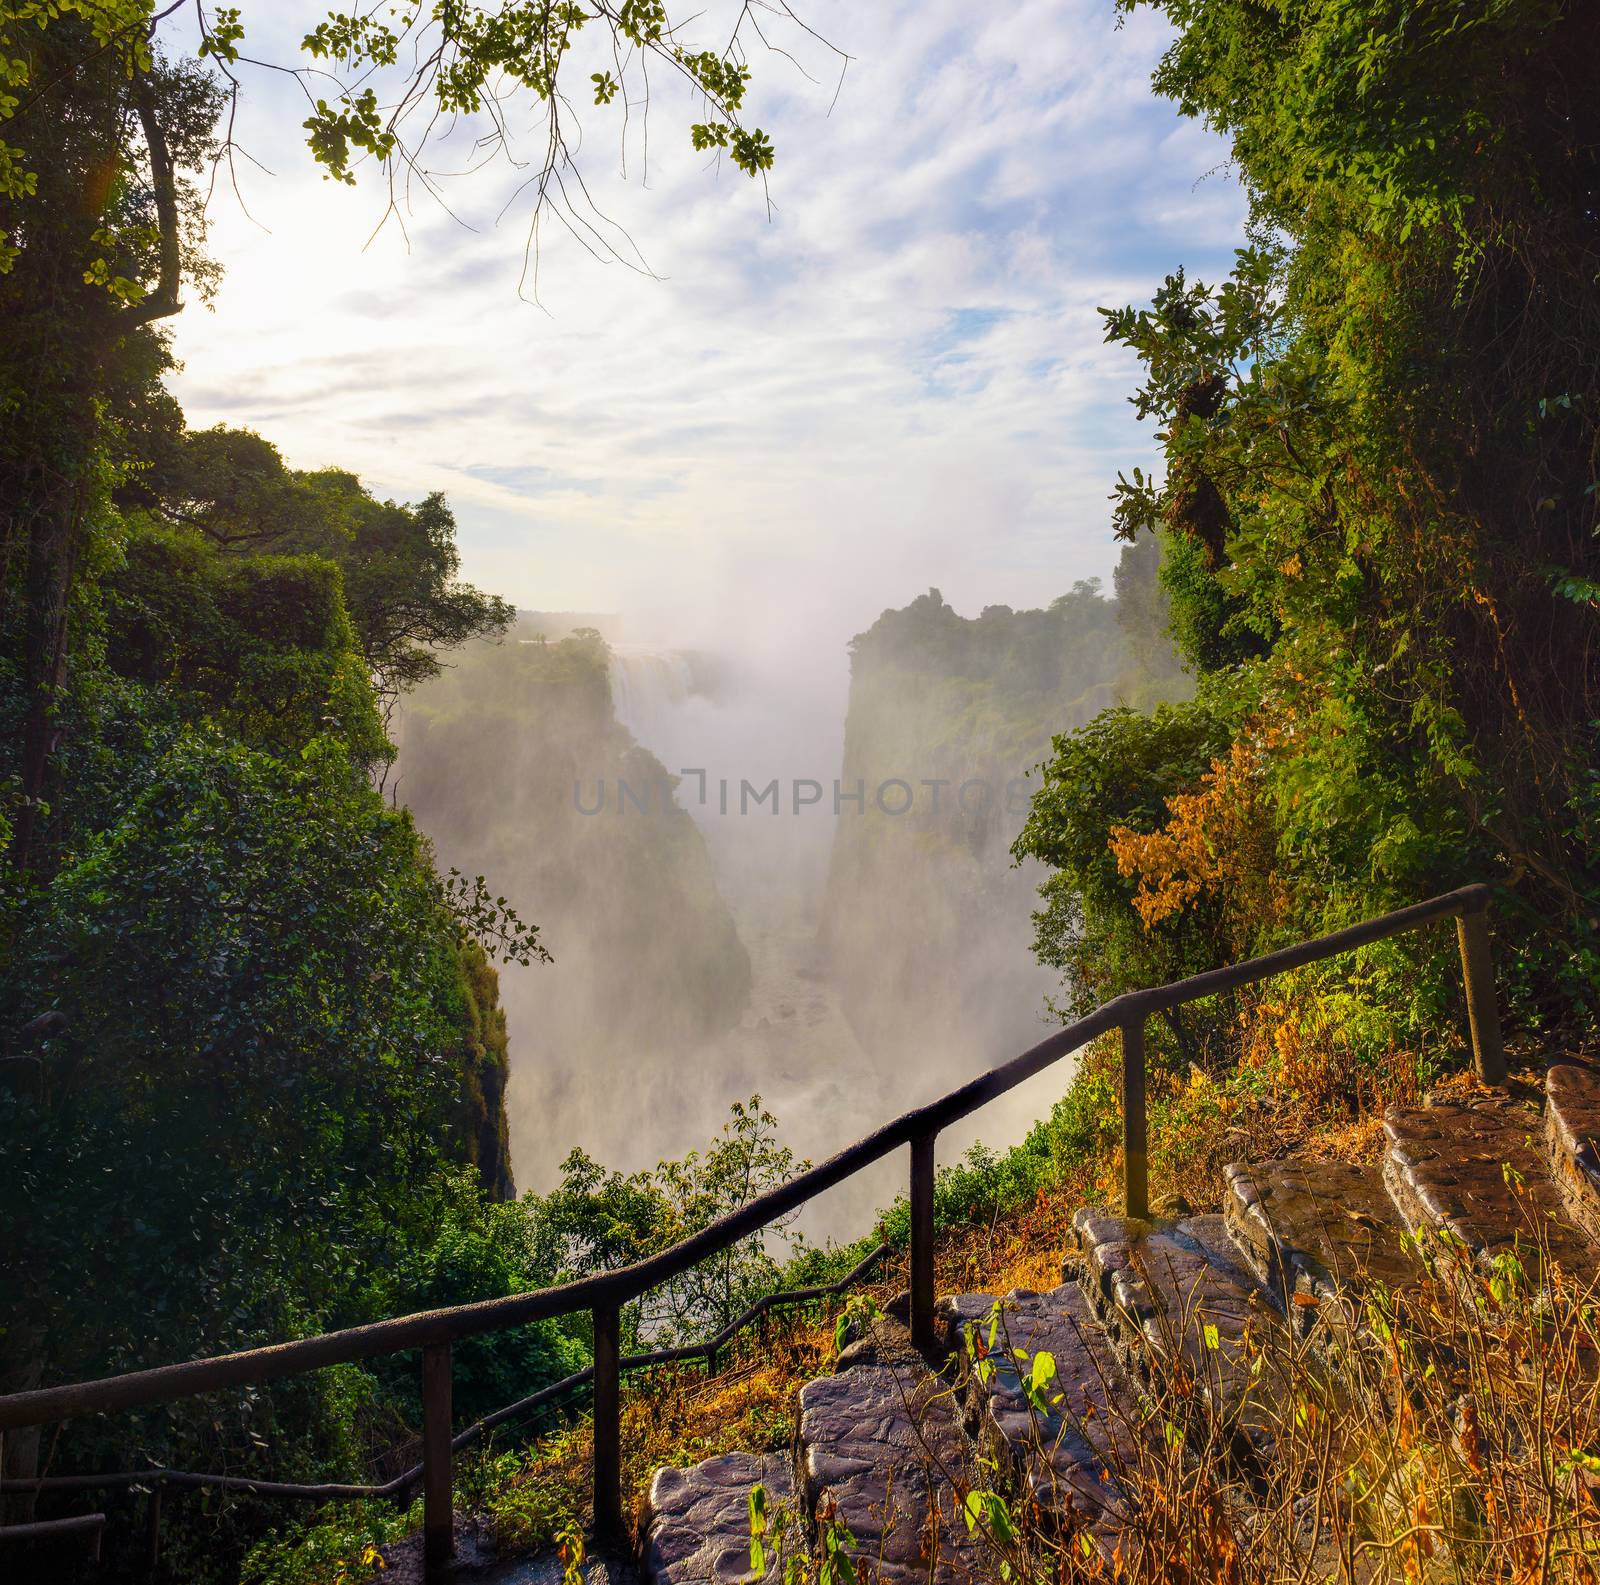 Staircase going to the Victoria Falls on Zambezi River in Zimbabwe by nickfox